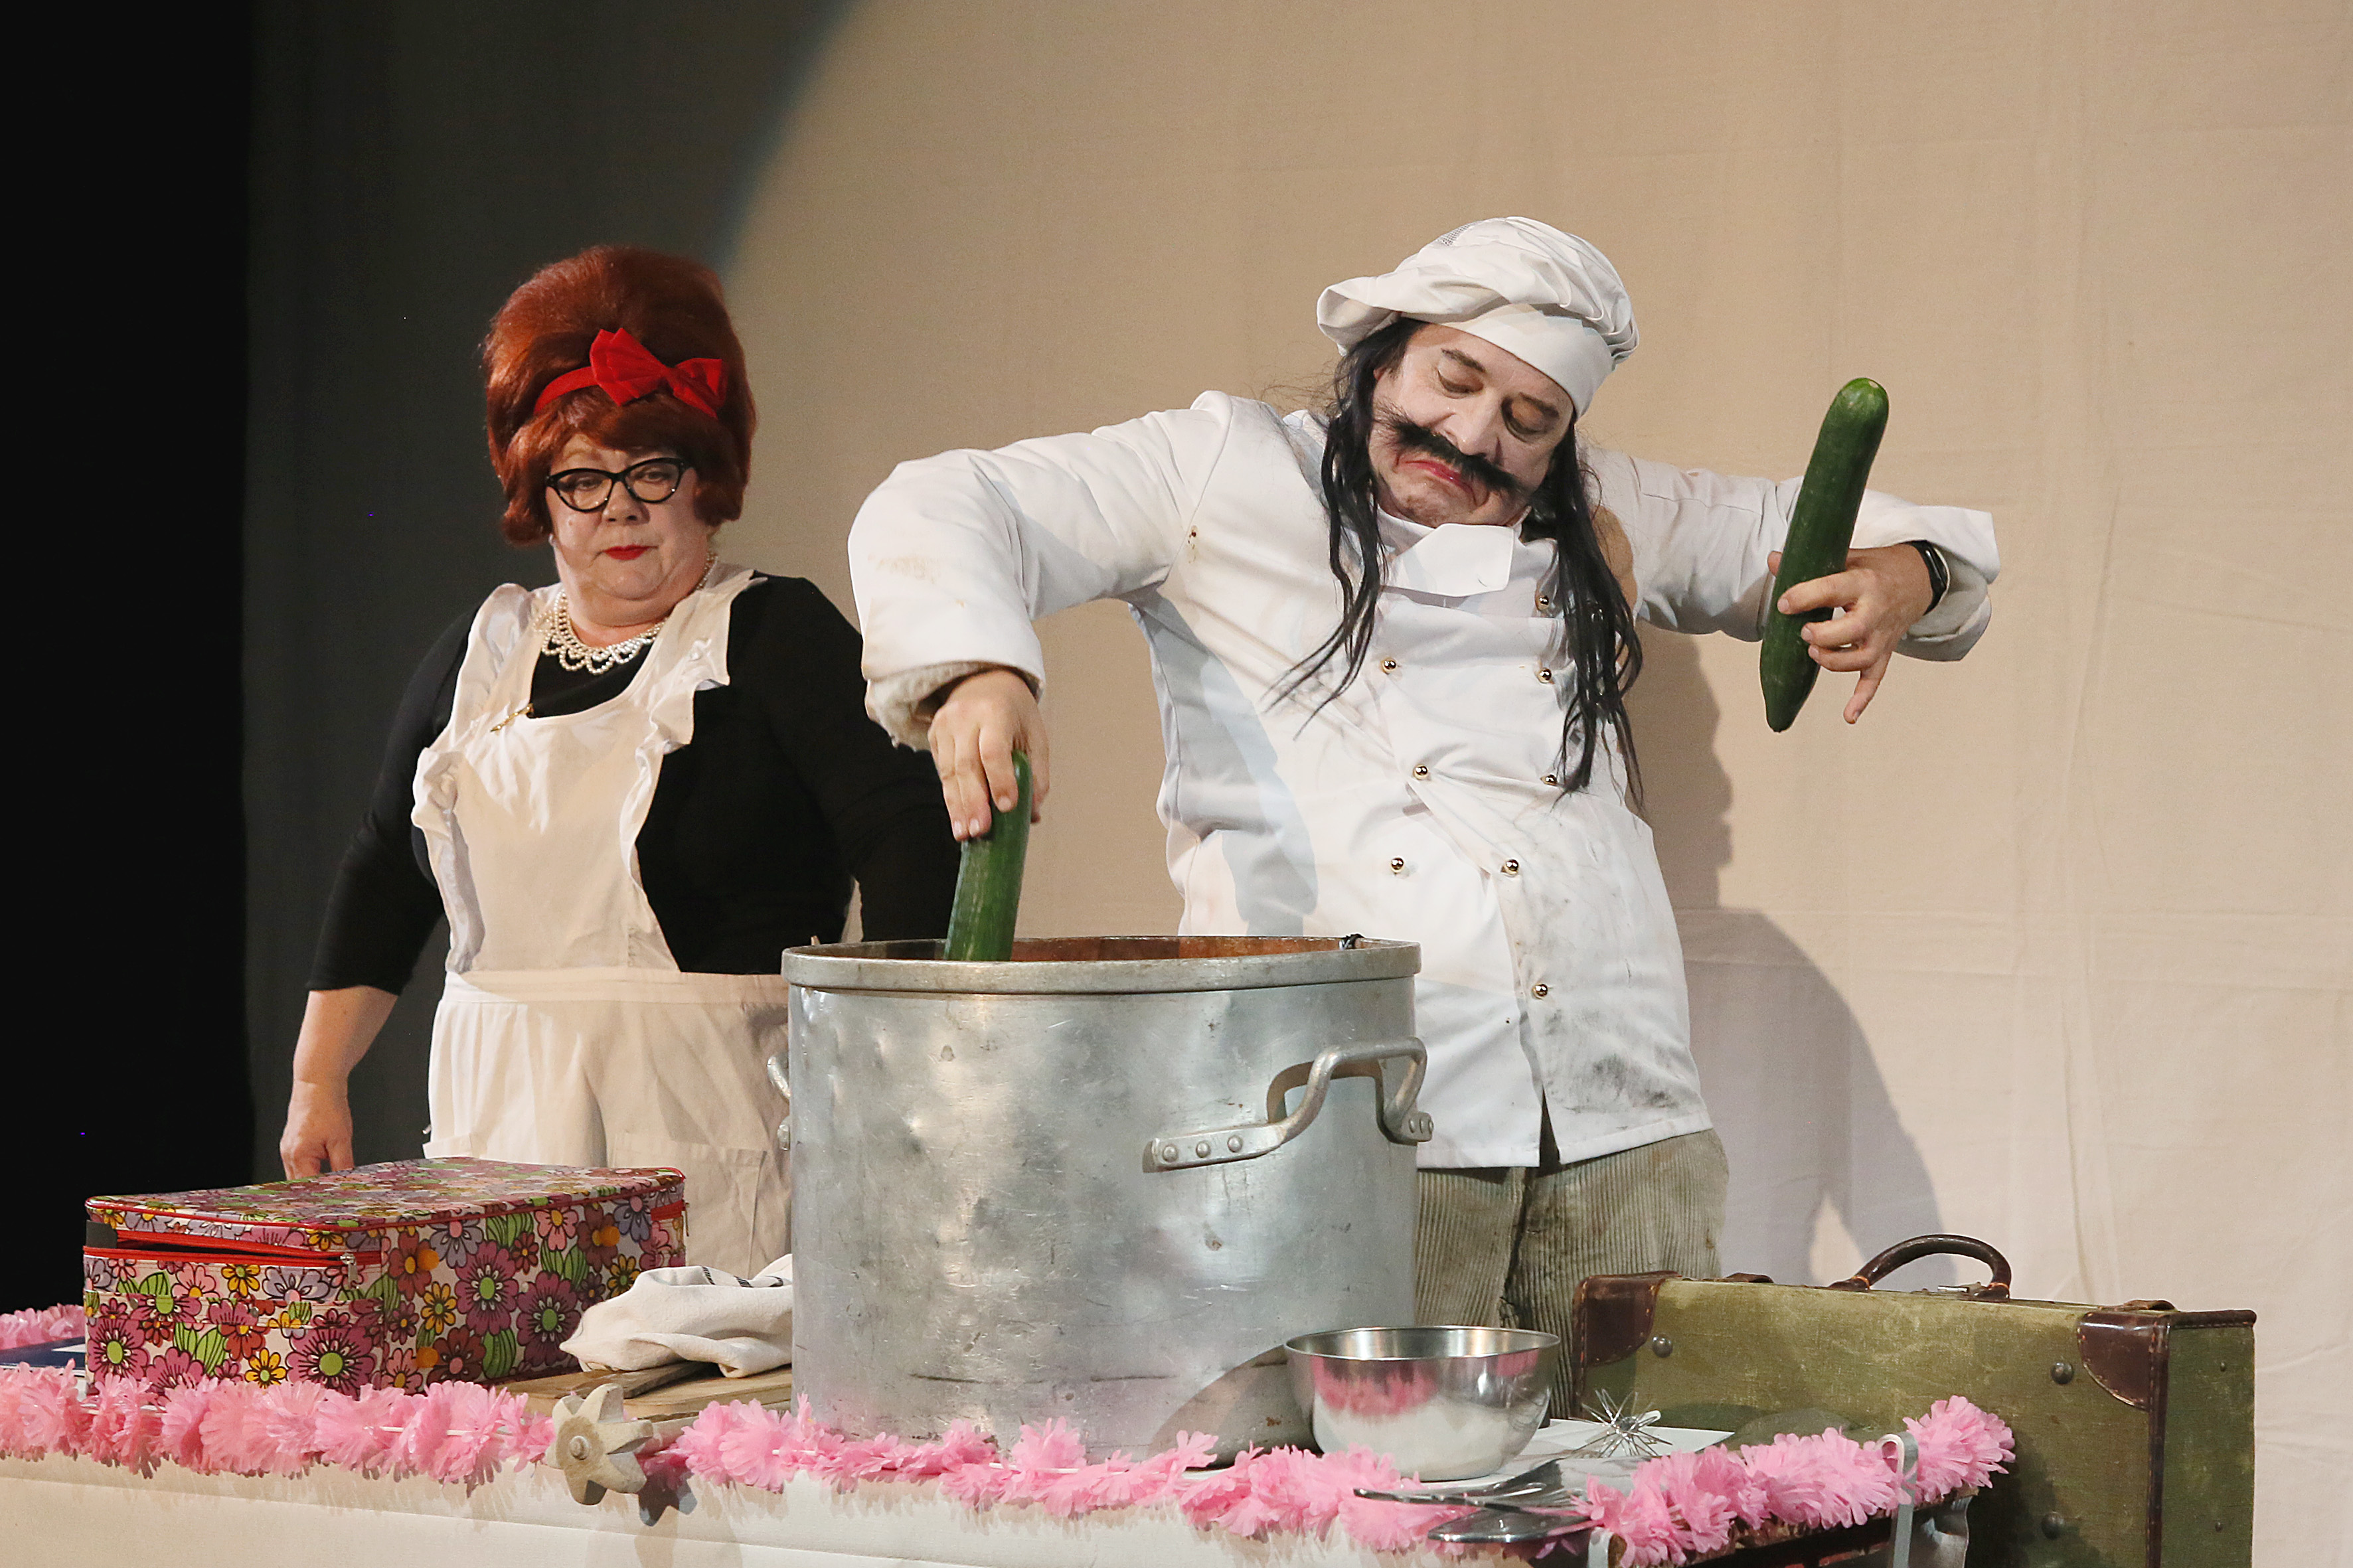 A chubby chef in full cooking gear throws a cucumber into a large pot. He holds another cucumber in his other hand. A woman in a chef's apron stands next to him and watches the action.